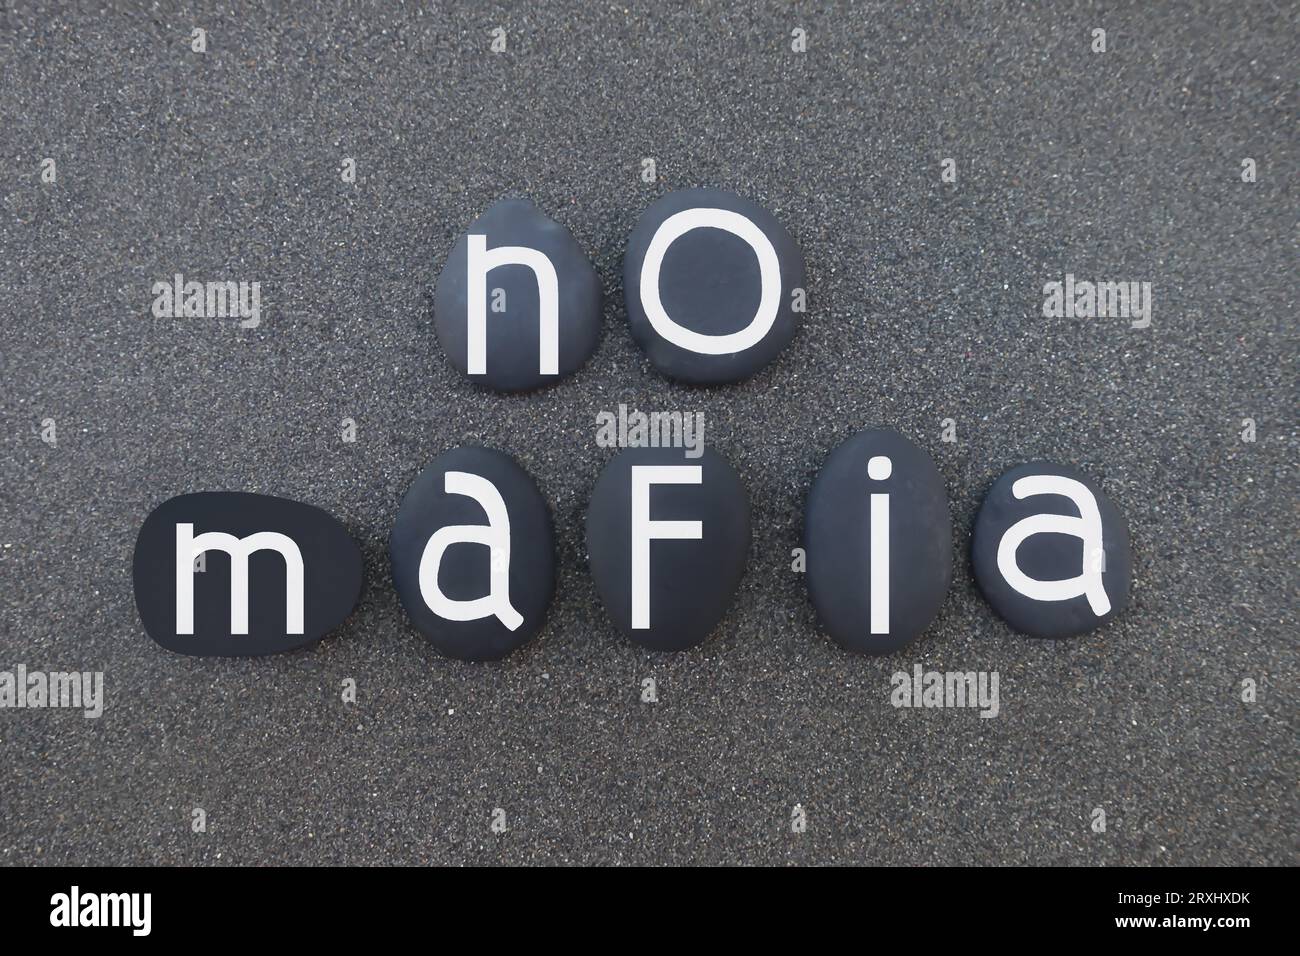 No mafia, social issue slogan composed with black painted stones over black volcanic sand Stock Photo